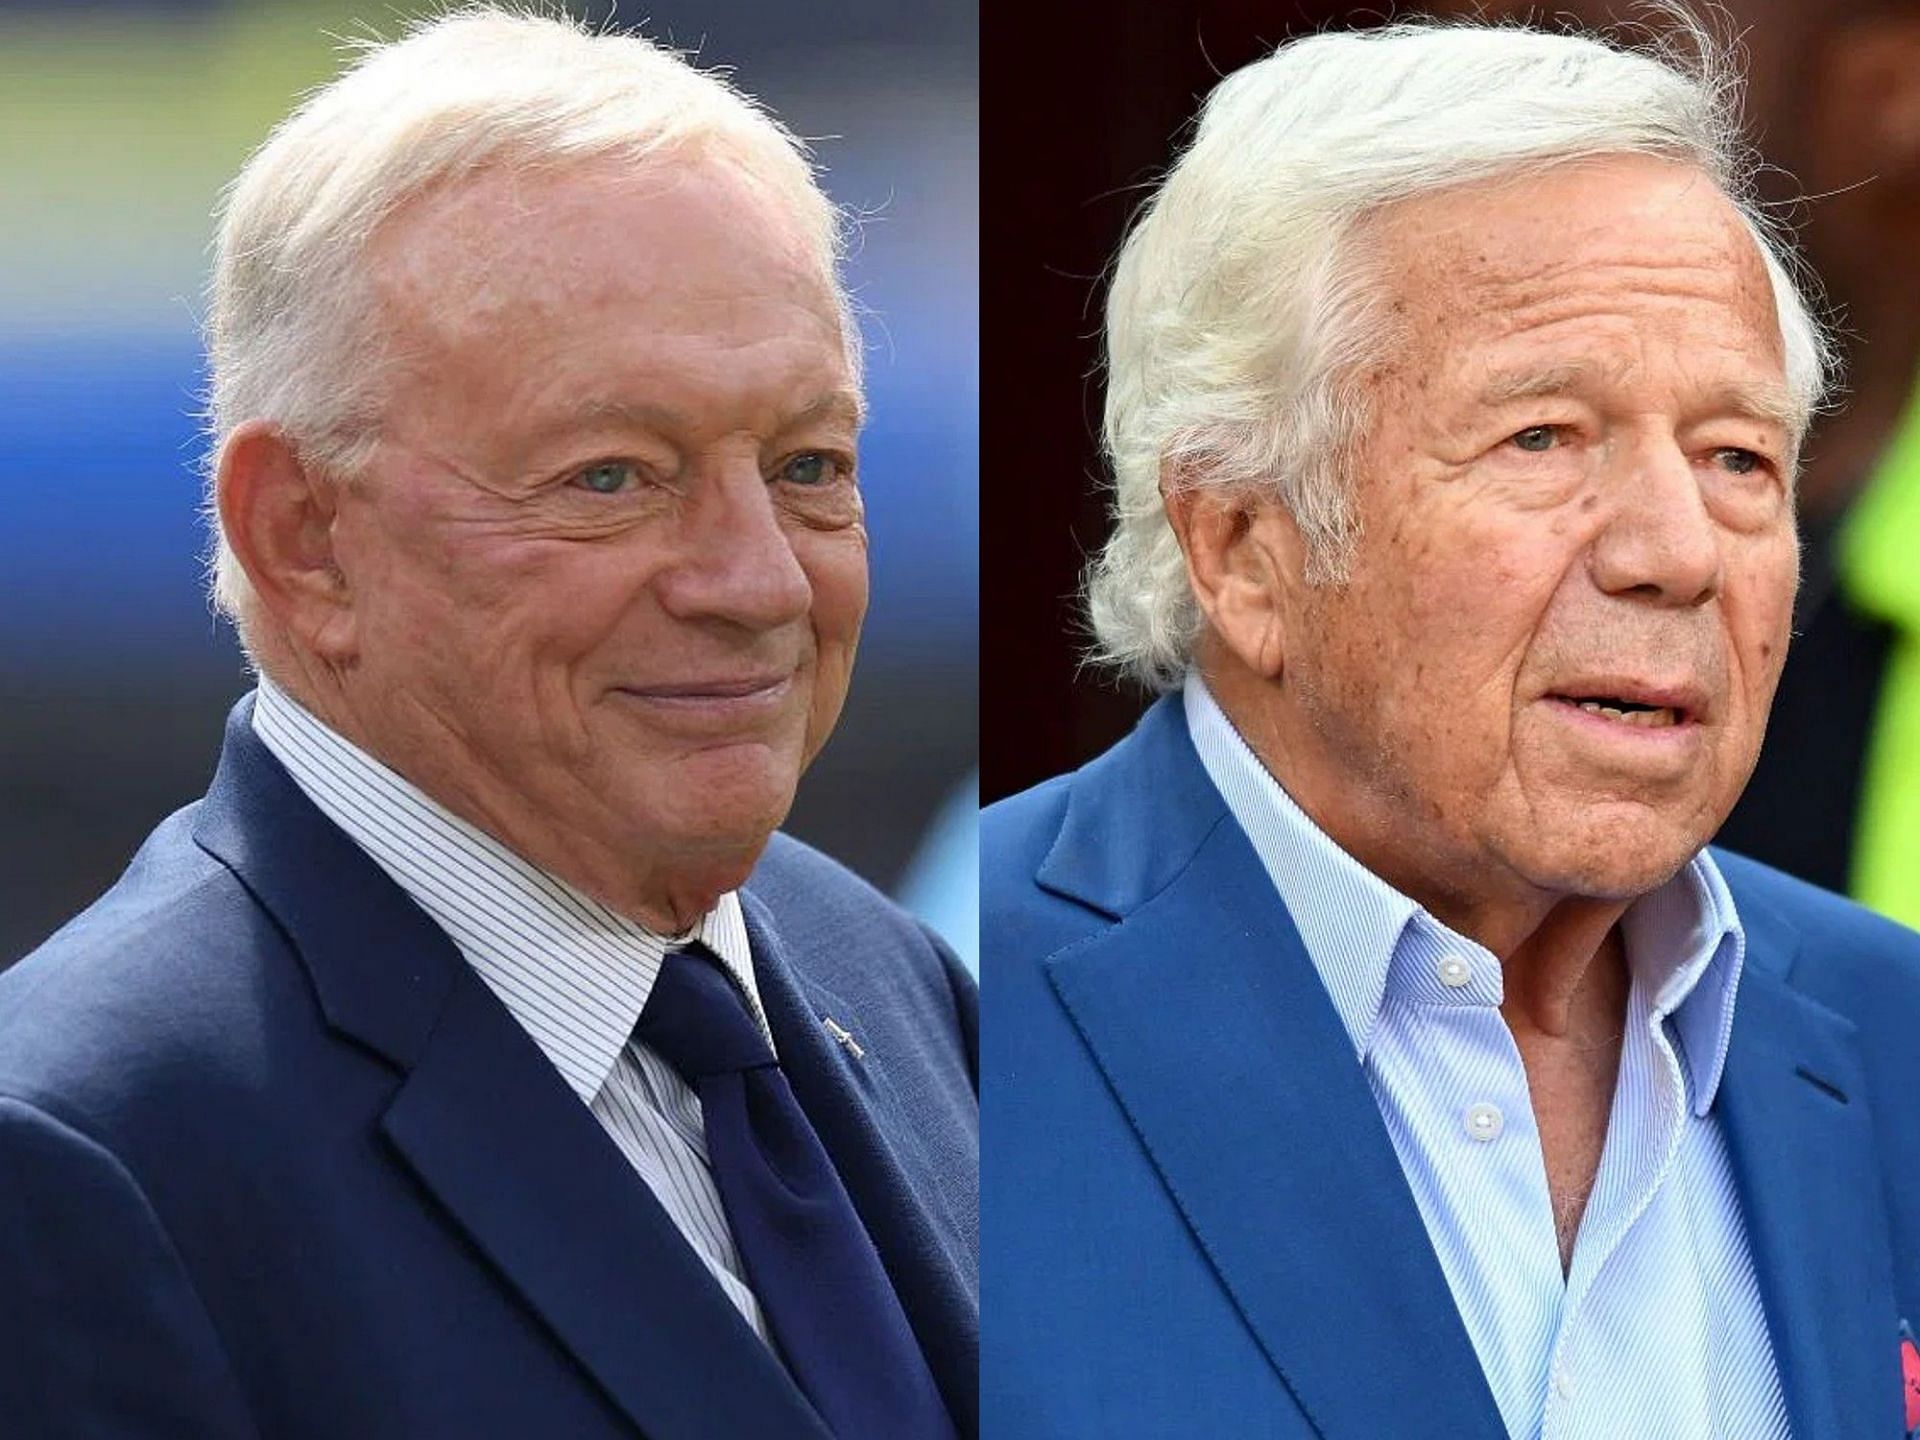 Cowboys and Patriots owners have a rivalry, claims NFL analyst